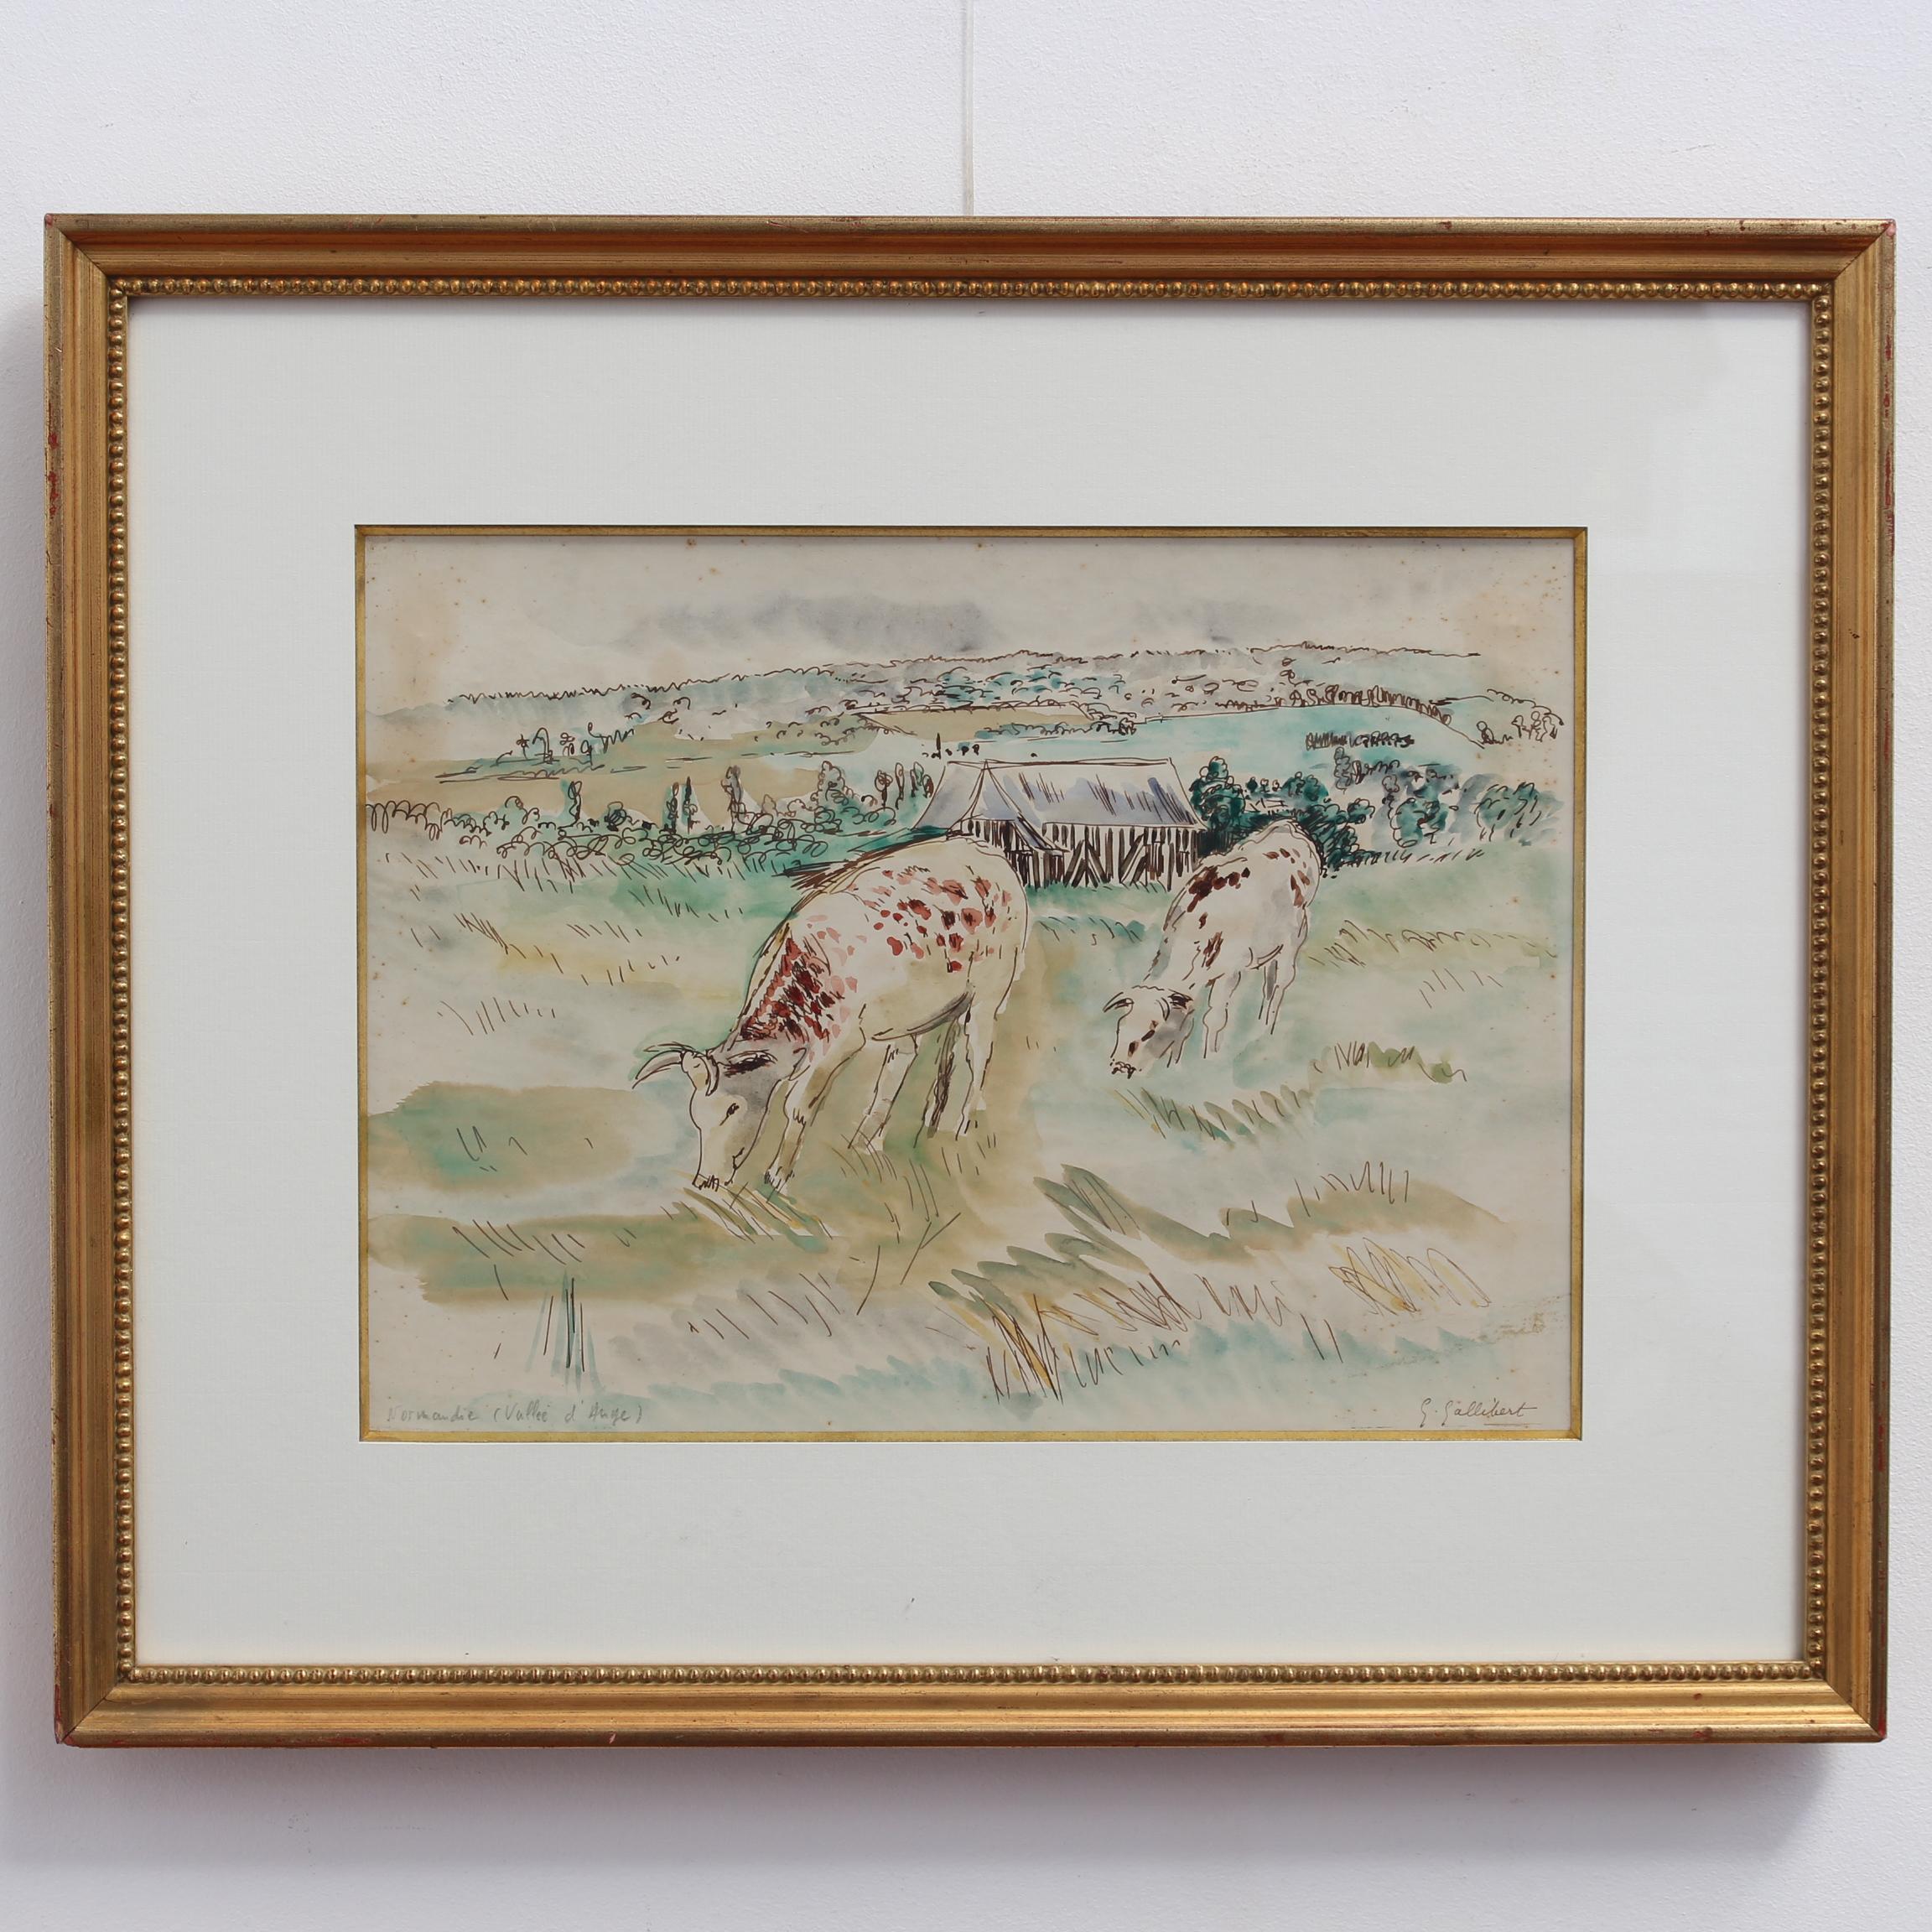 Genevieve Gallibert - Grazing Cattle in Normandy For Sale at 1stDibs